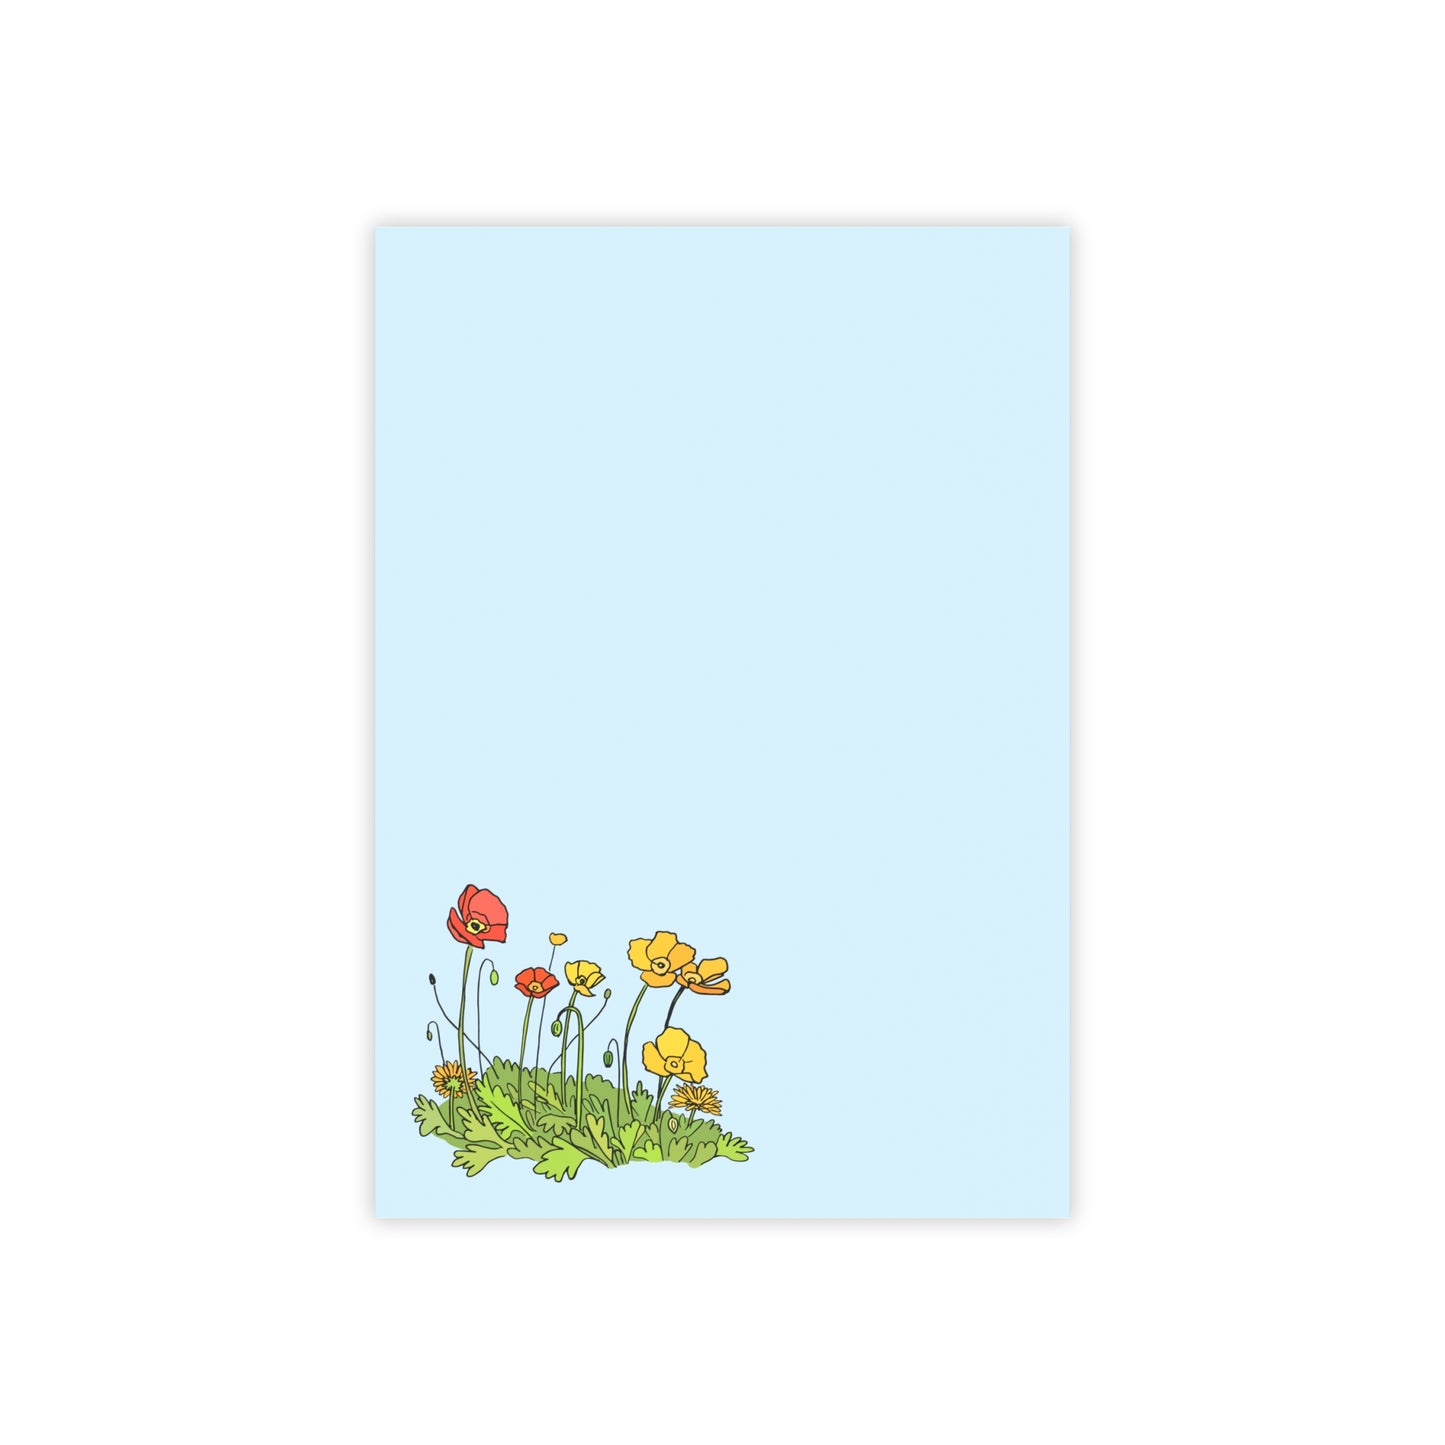 Patch of Poppies - Post-it Note Pad